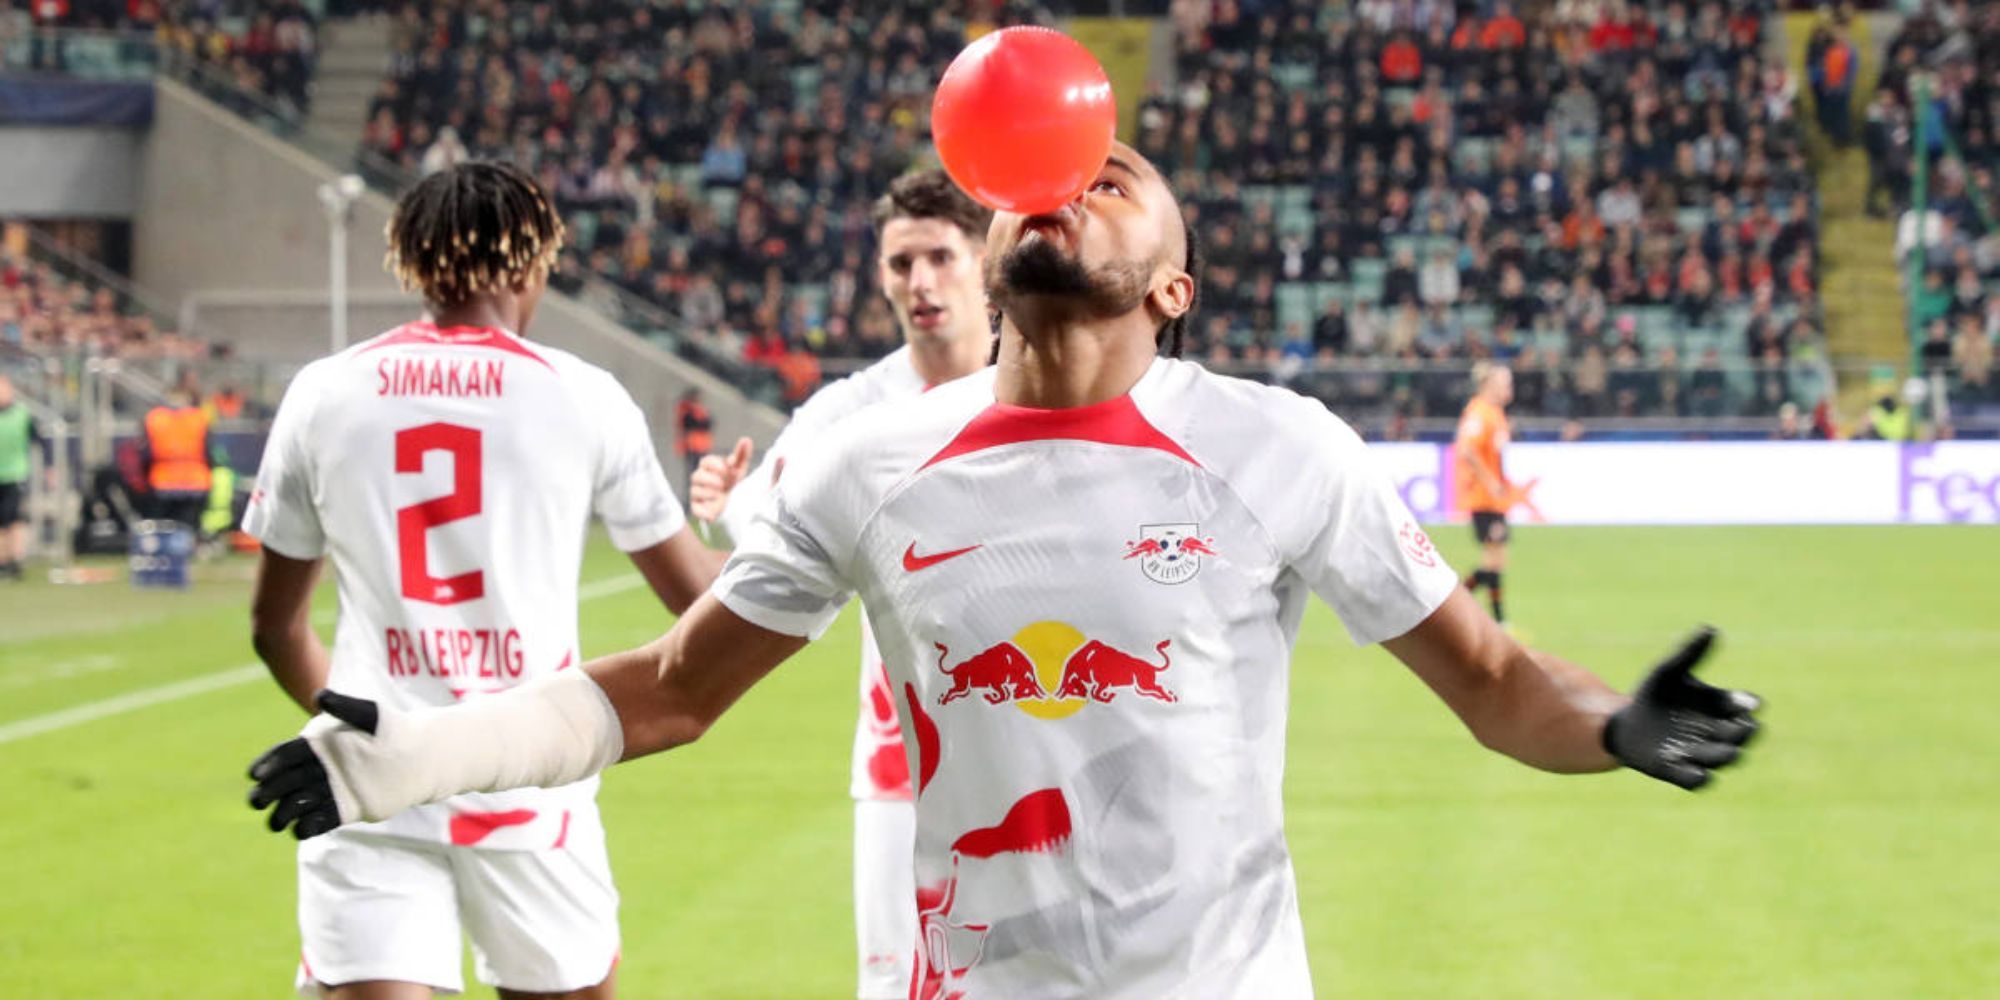 RB Leipzig have some of the most talented players in Europe